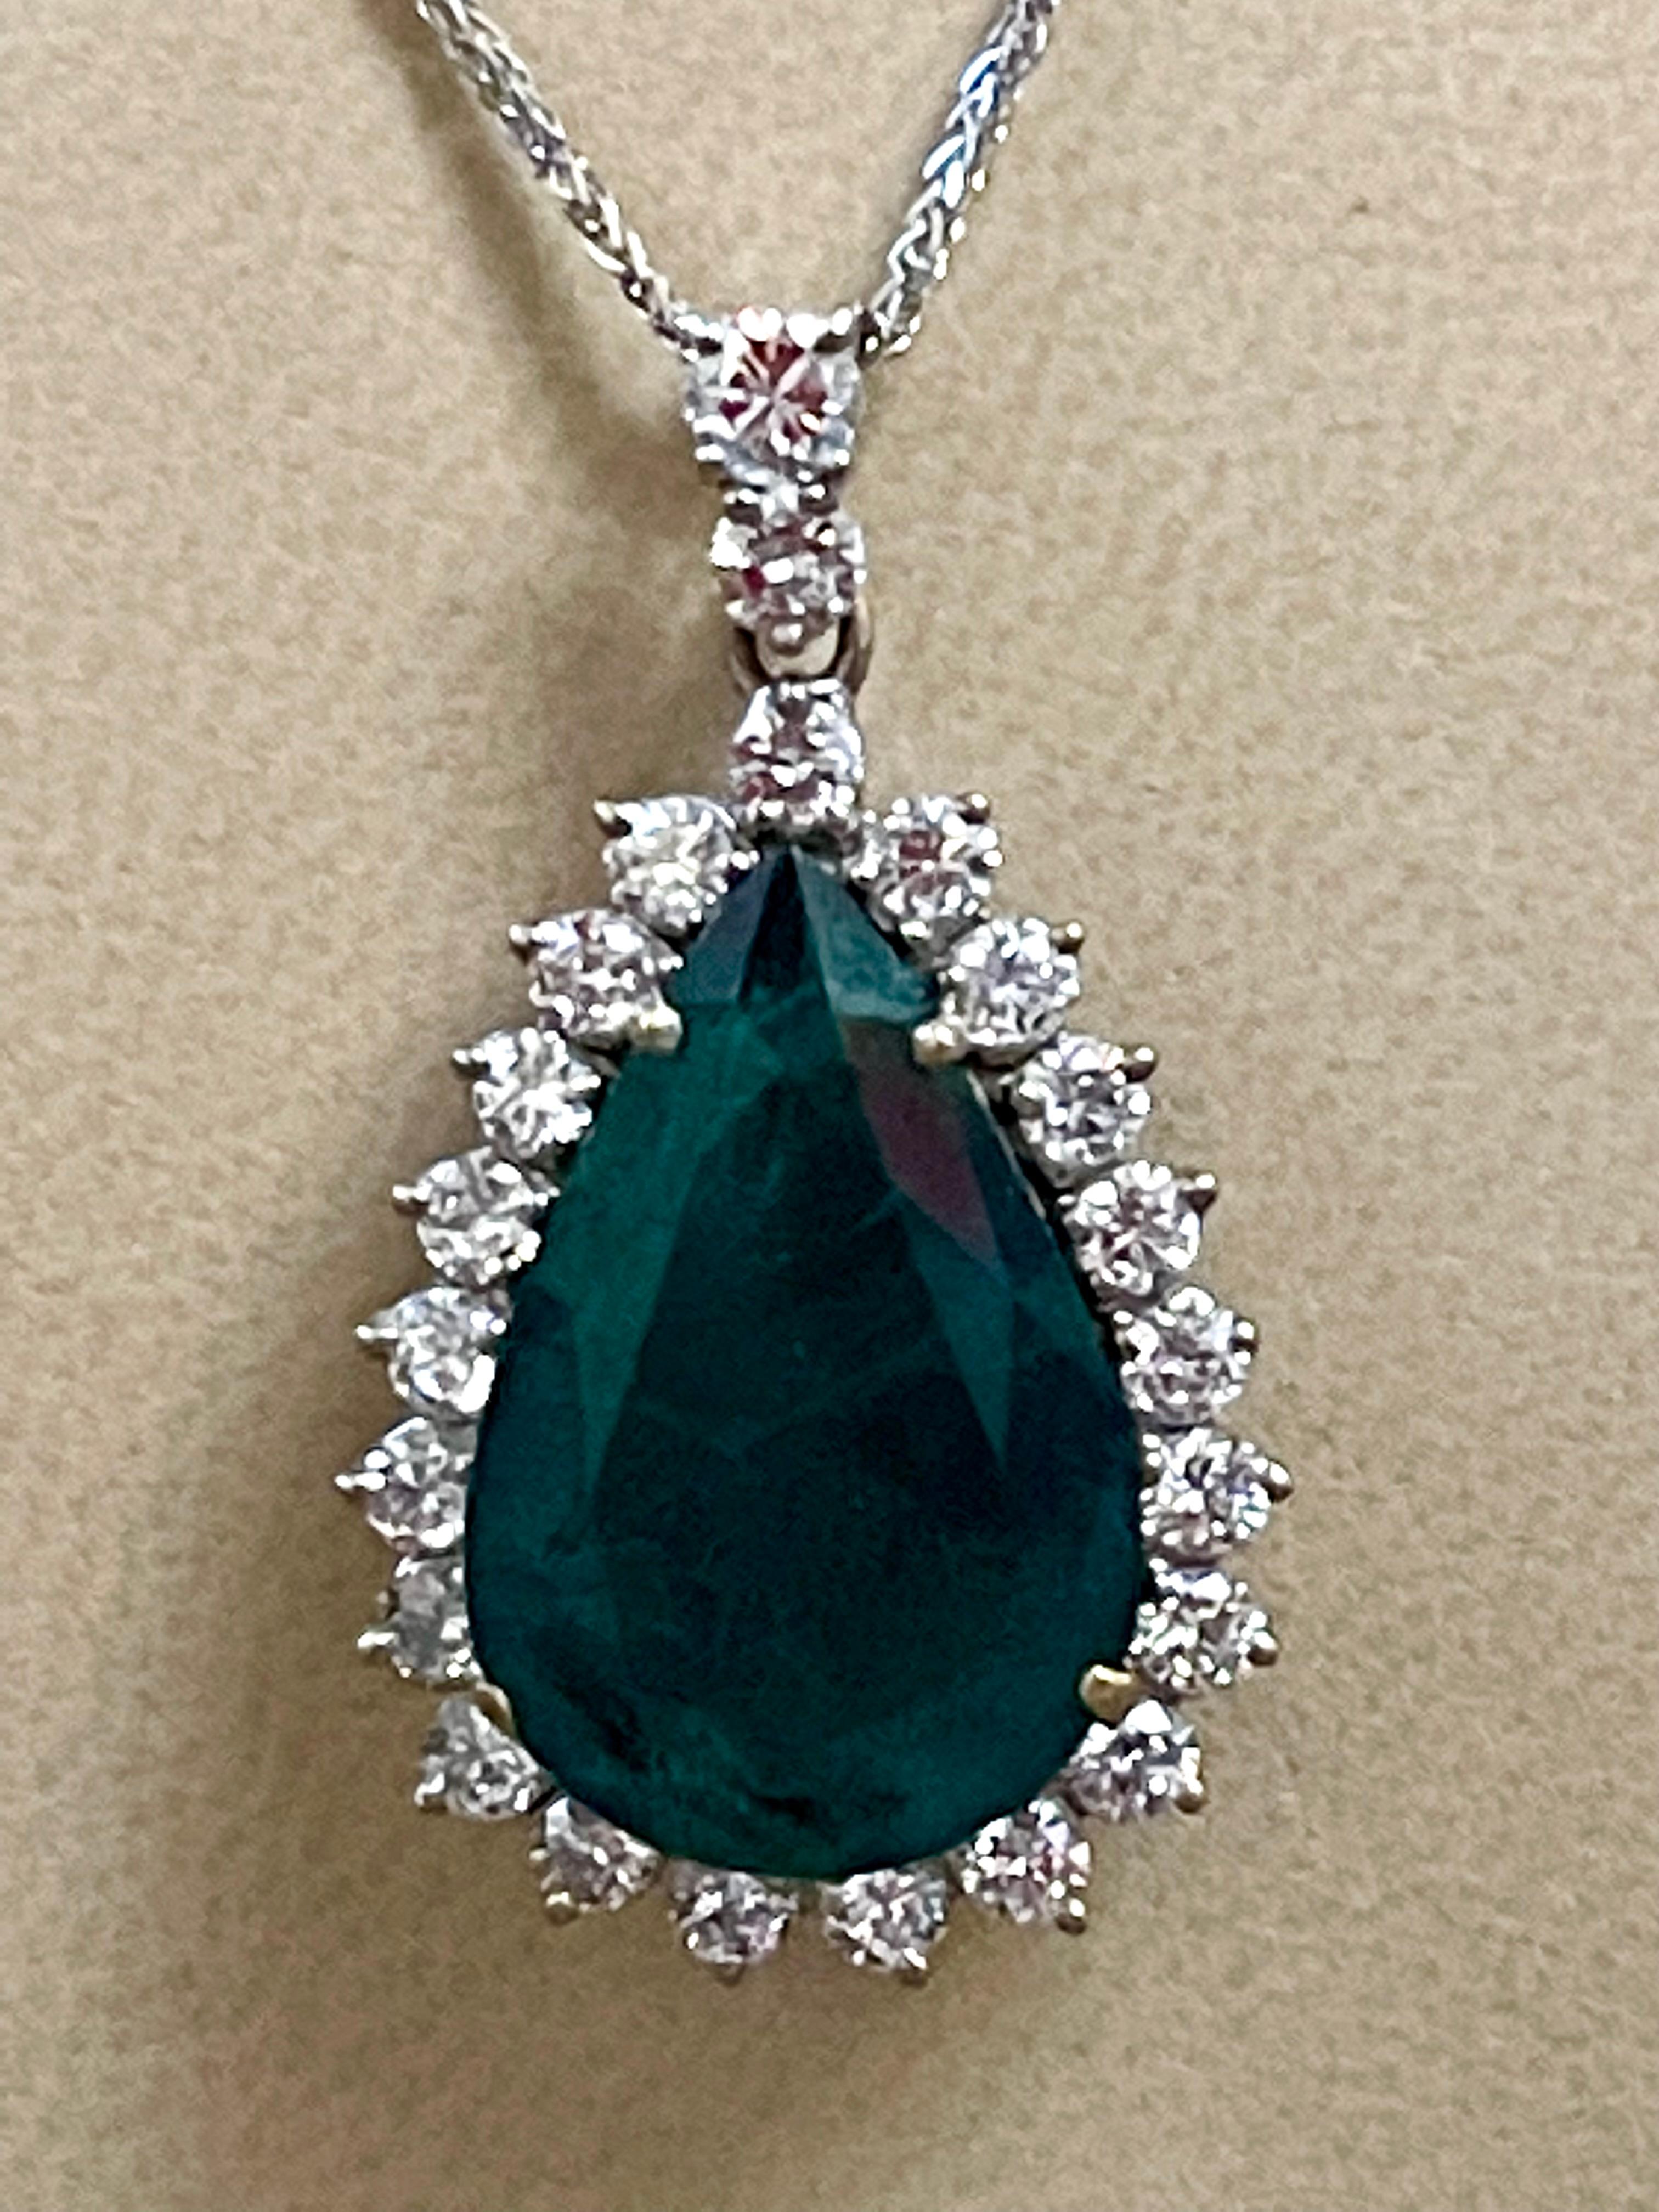 15 Ct Pear Hydro Emerald & 4 Ct Diamond Pendent/Necklace 18 Kt White Gold For Sale 4